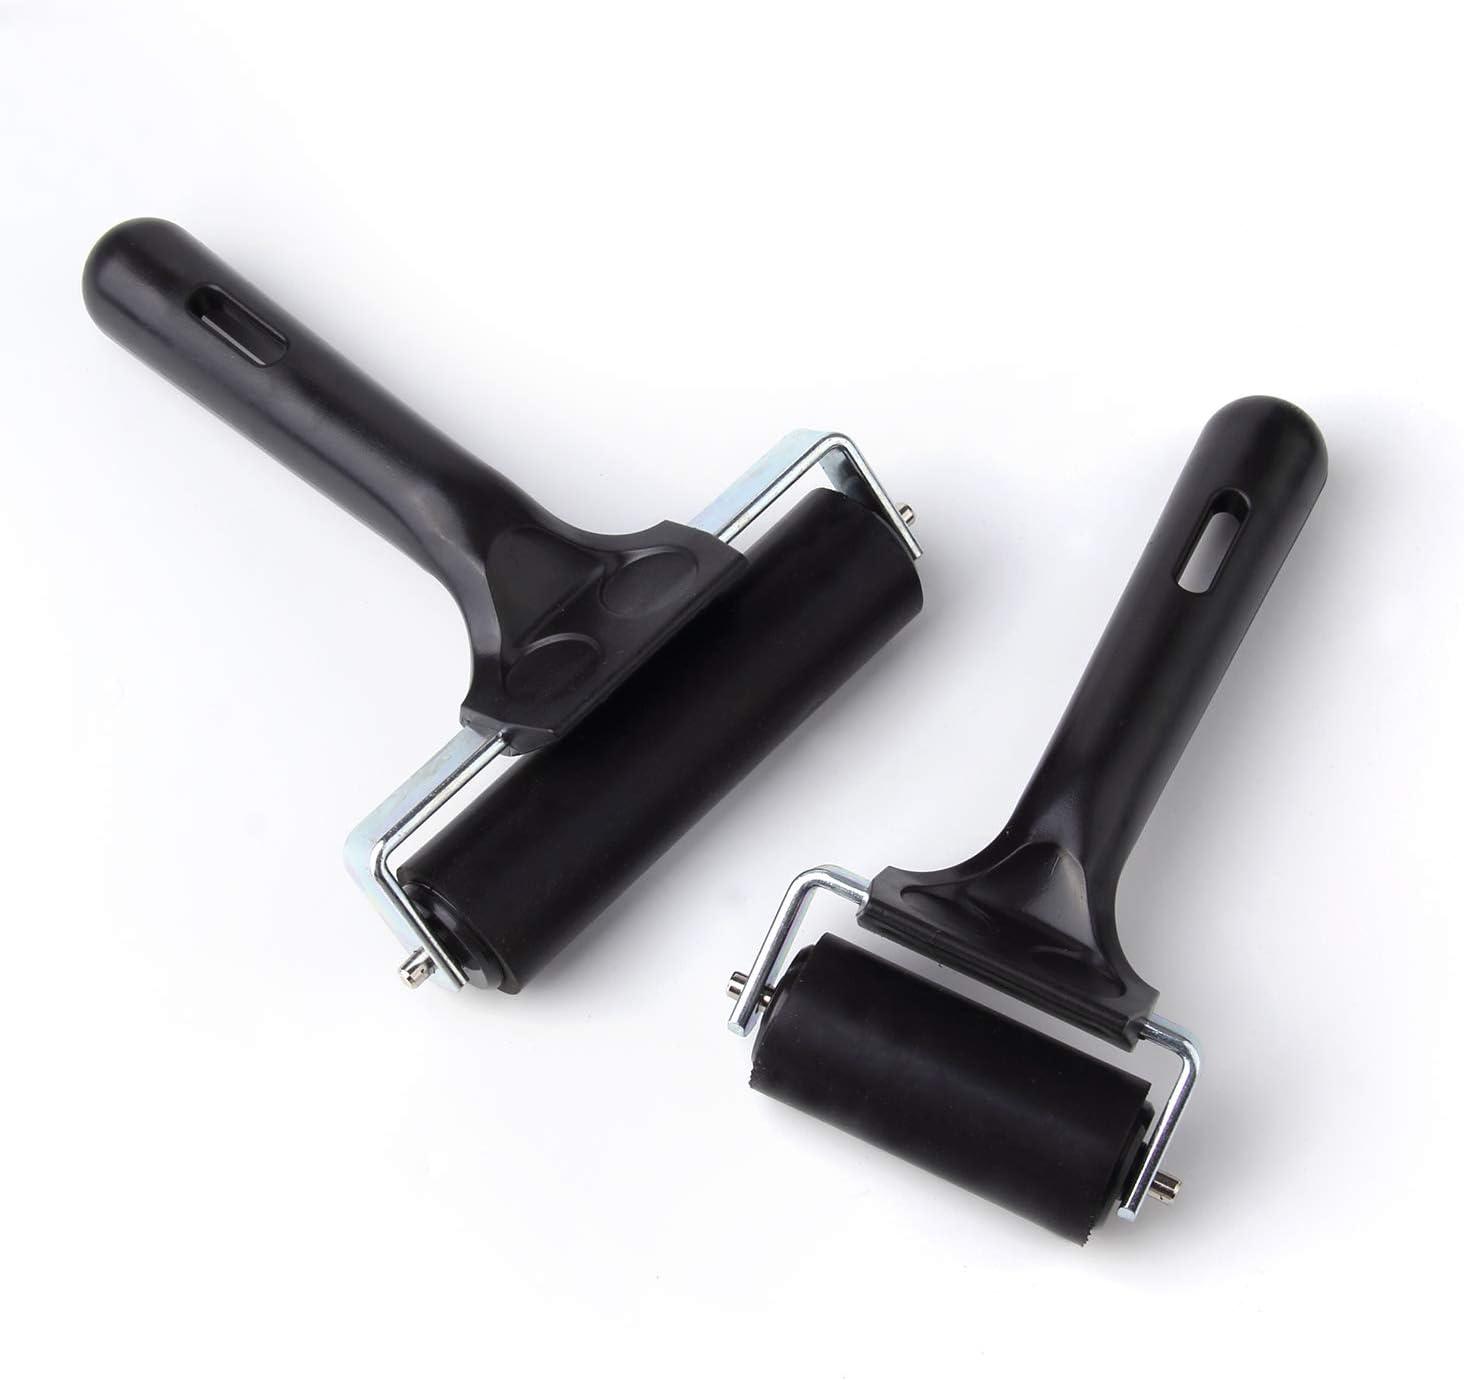 2pcs Rubber Roller Brayer for Craft Printmaking Stamping, 4 & 3 inch - Black